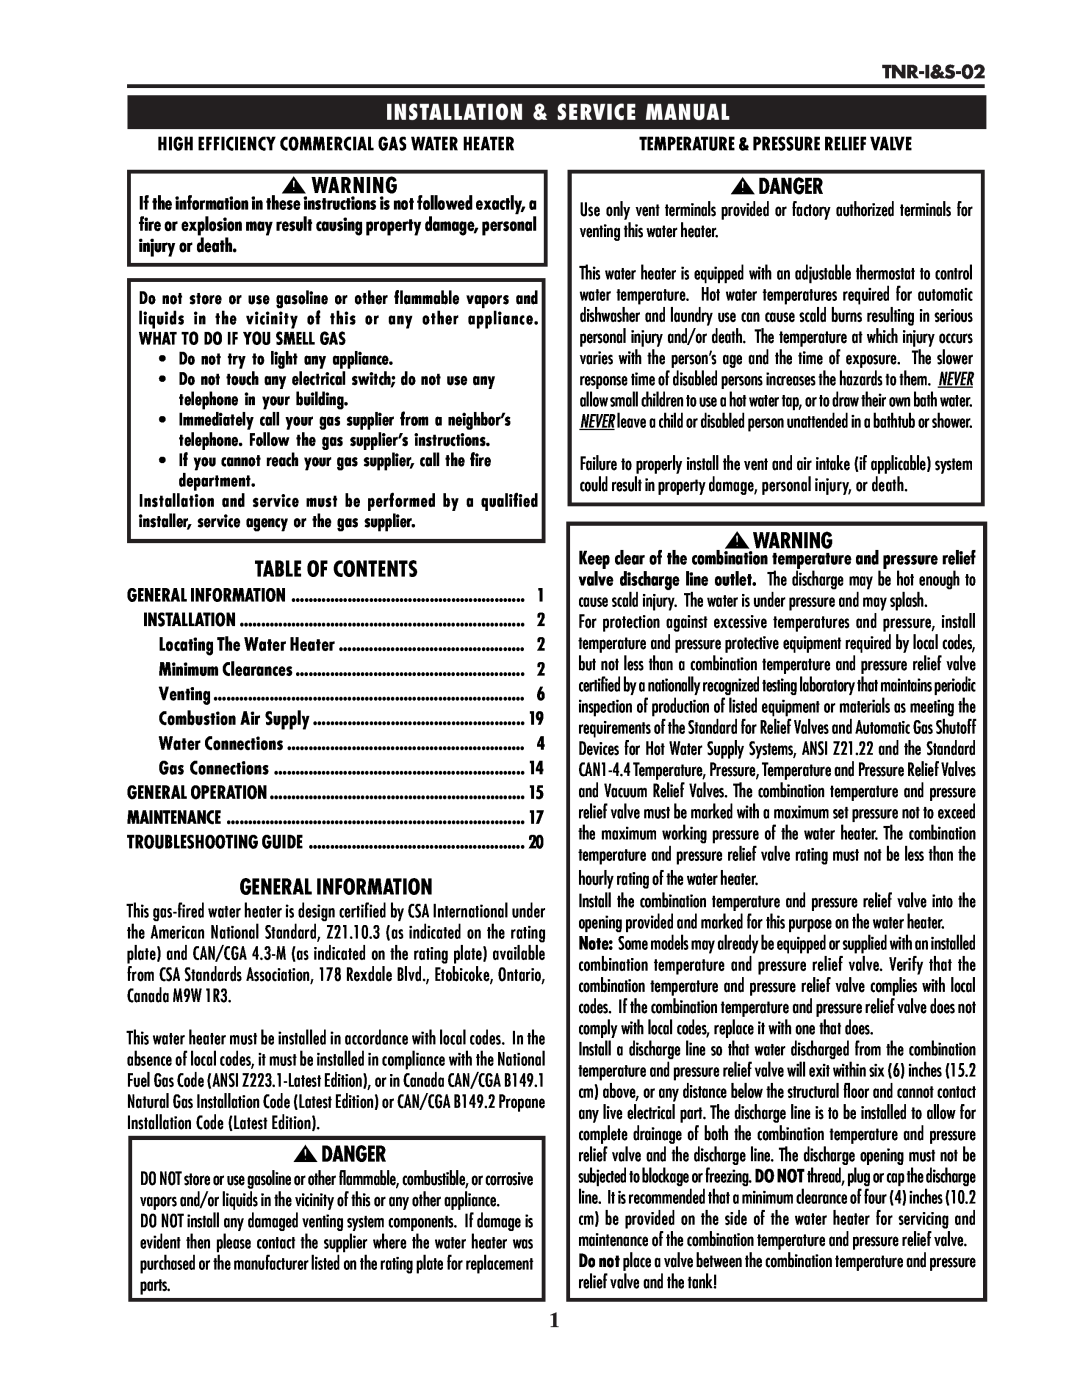 Lochinvar TNR-I&S-02 service manual Table Of Contents, General Information, Danger, What To Do If You Smell Gas 